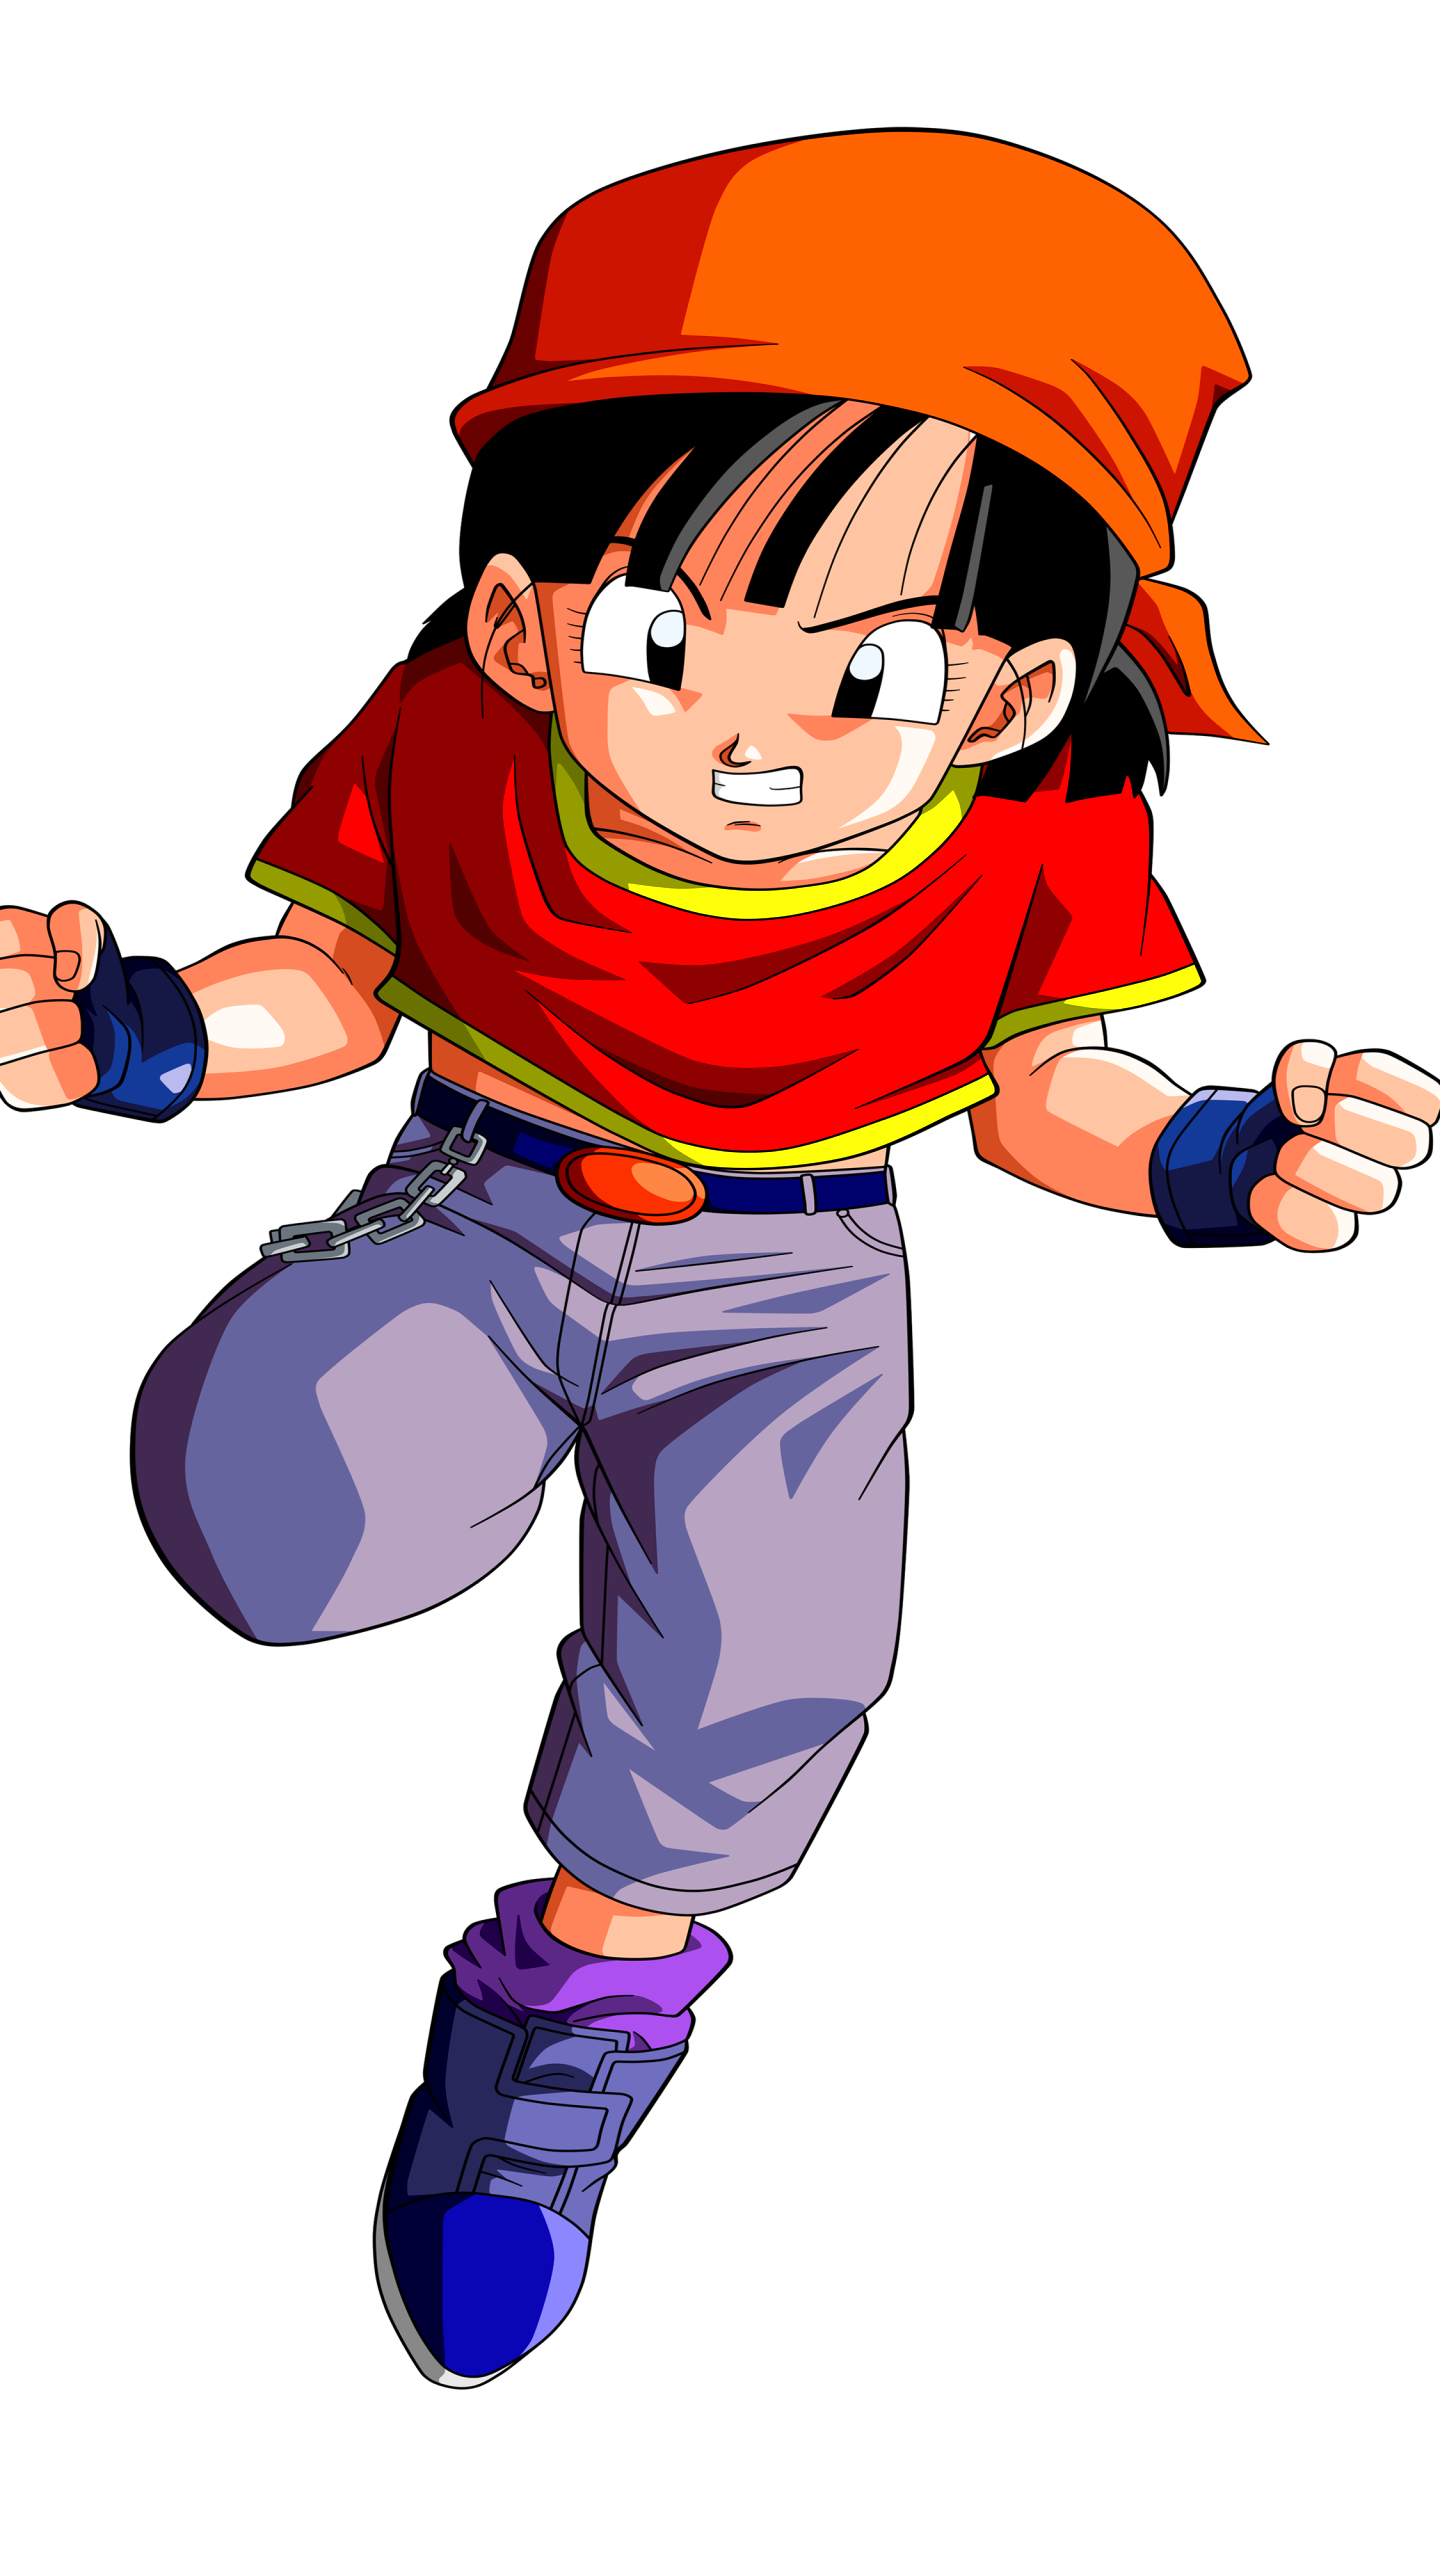 Pan Dragon Ball, HD Png Download - 1024x1024(#452342) - PngFind